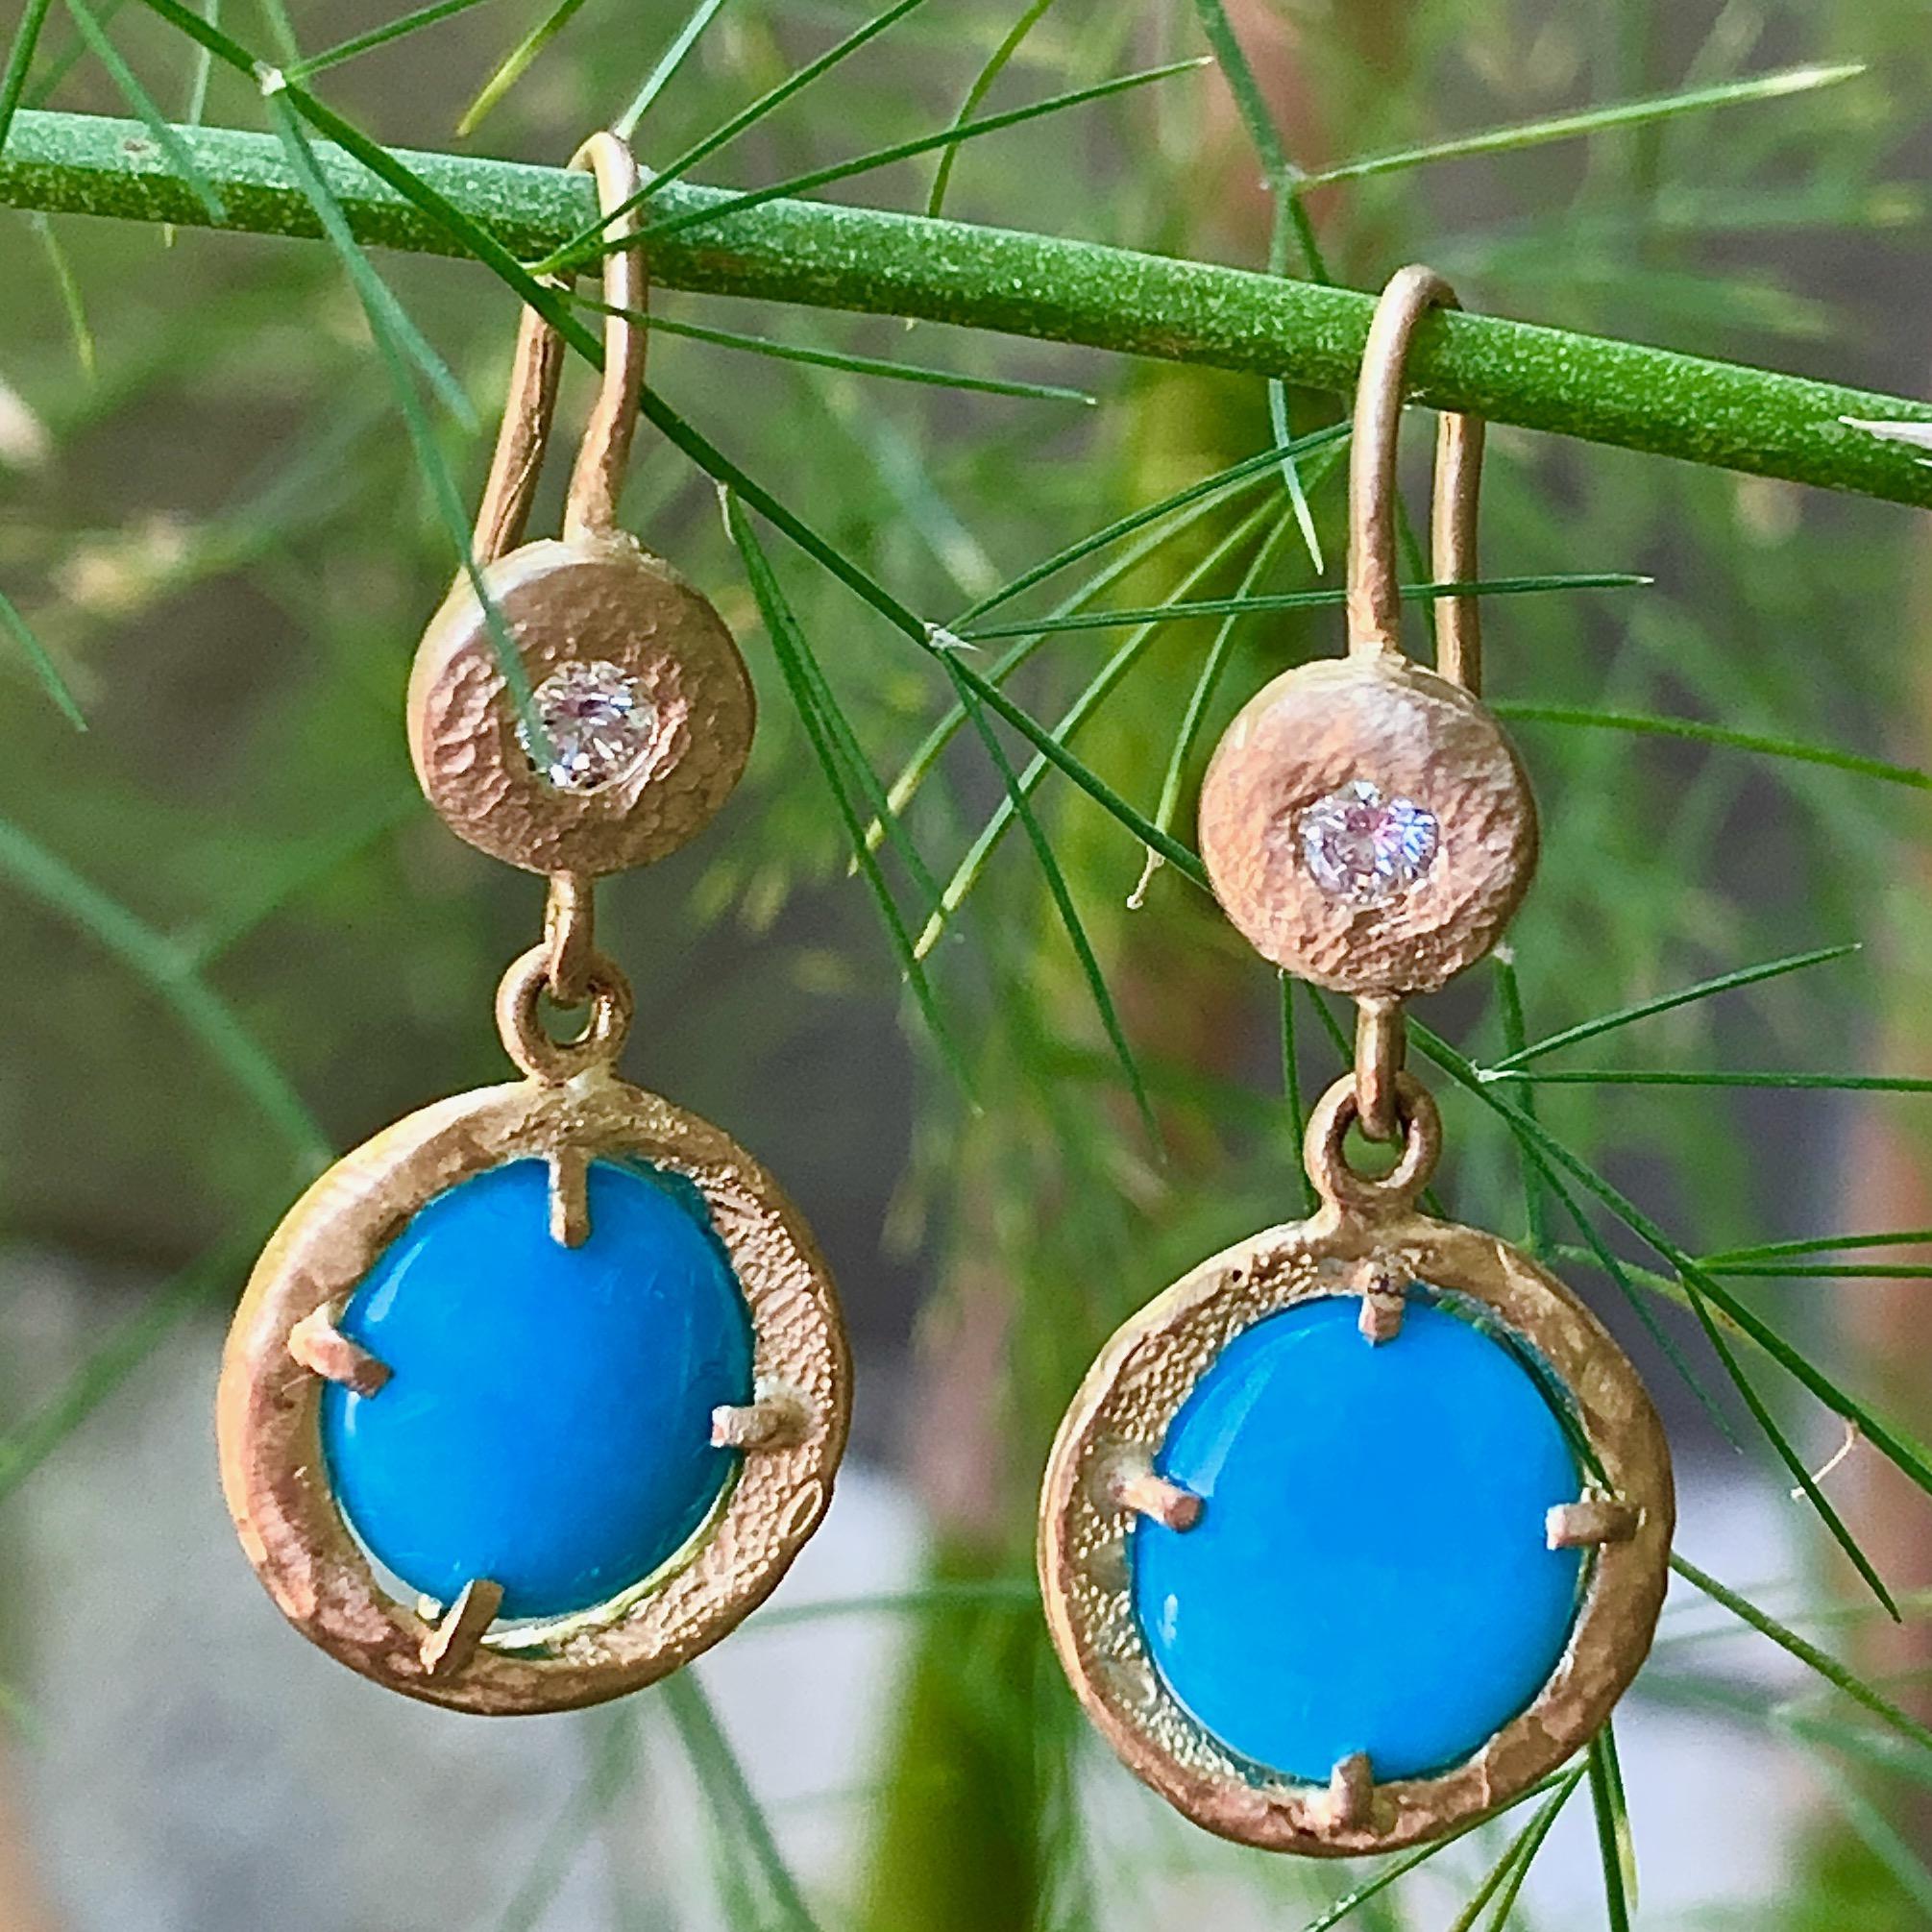 These one-of-a-kind earrings by Eytan Brandes feature two discs of turquoise from the Sleeping Beauty mine in Globe Arizona.  Eytan bought a large rough stone of this stuff a few years before the mine closed down.  He was using it up quickly,